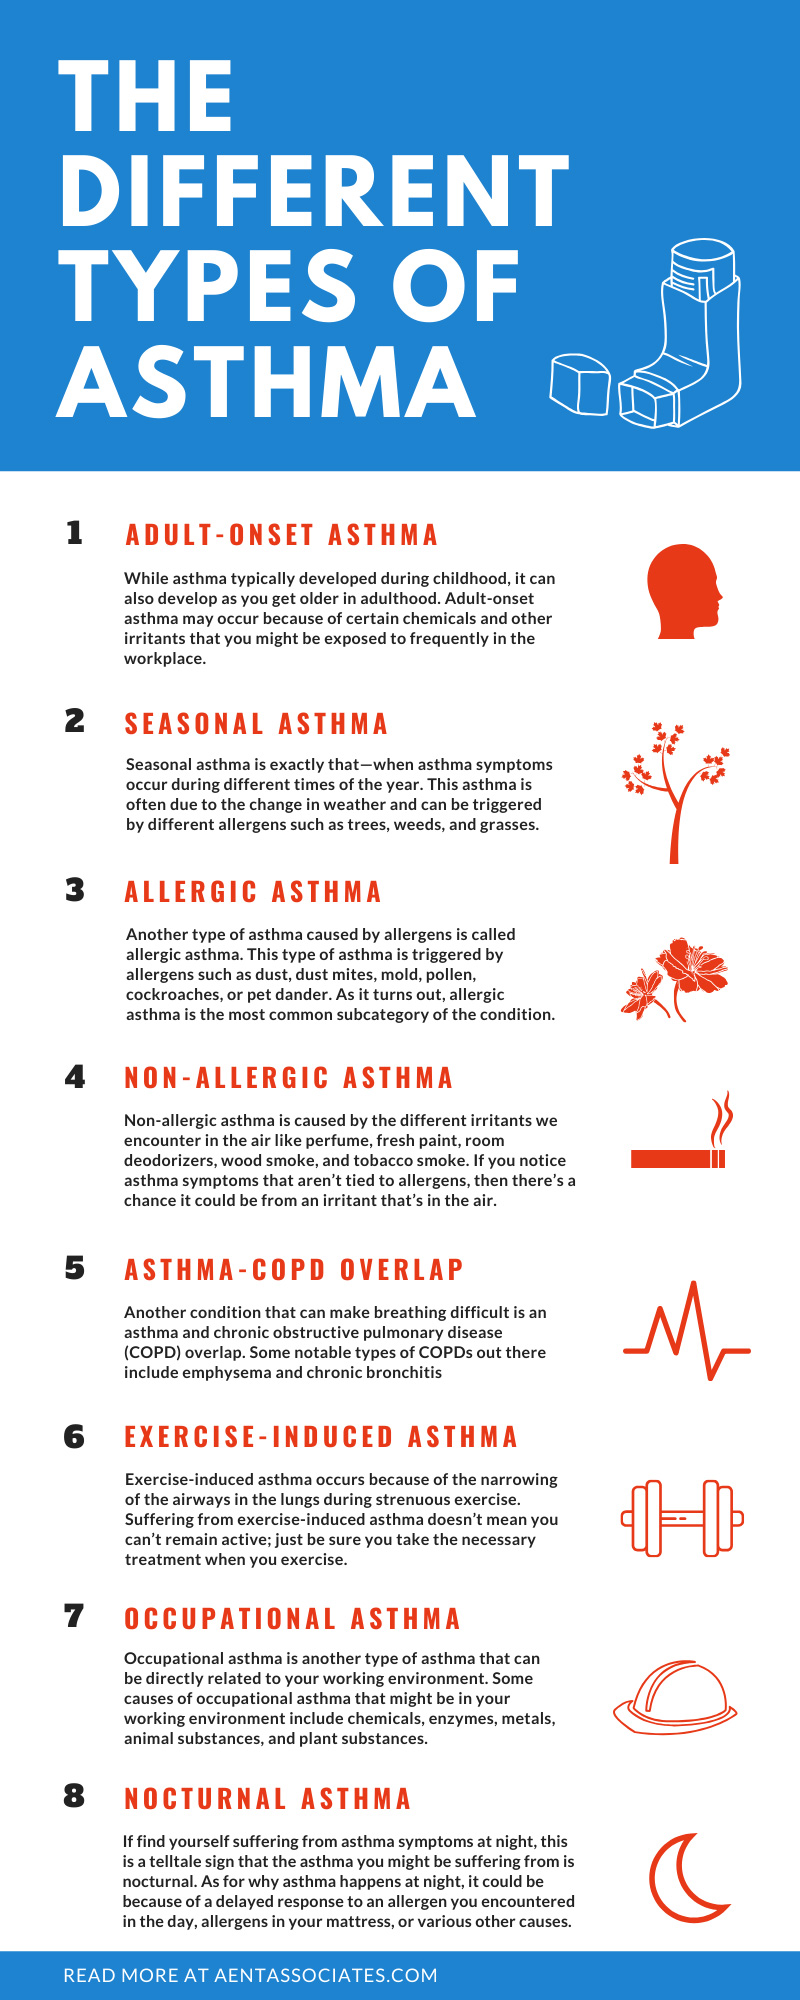 nocturnal asthma symptoms in adults